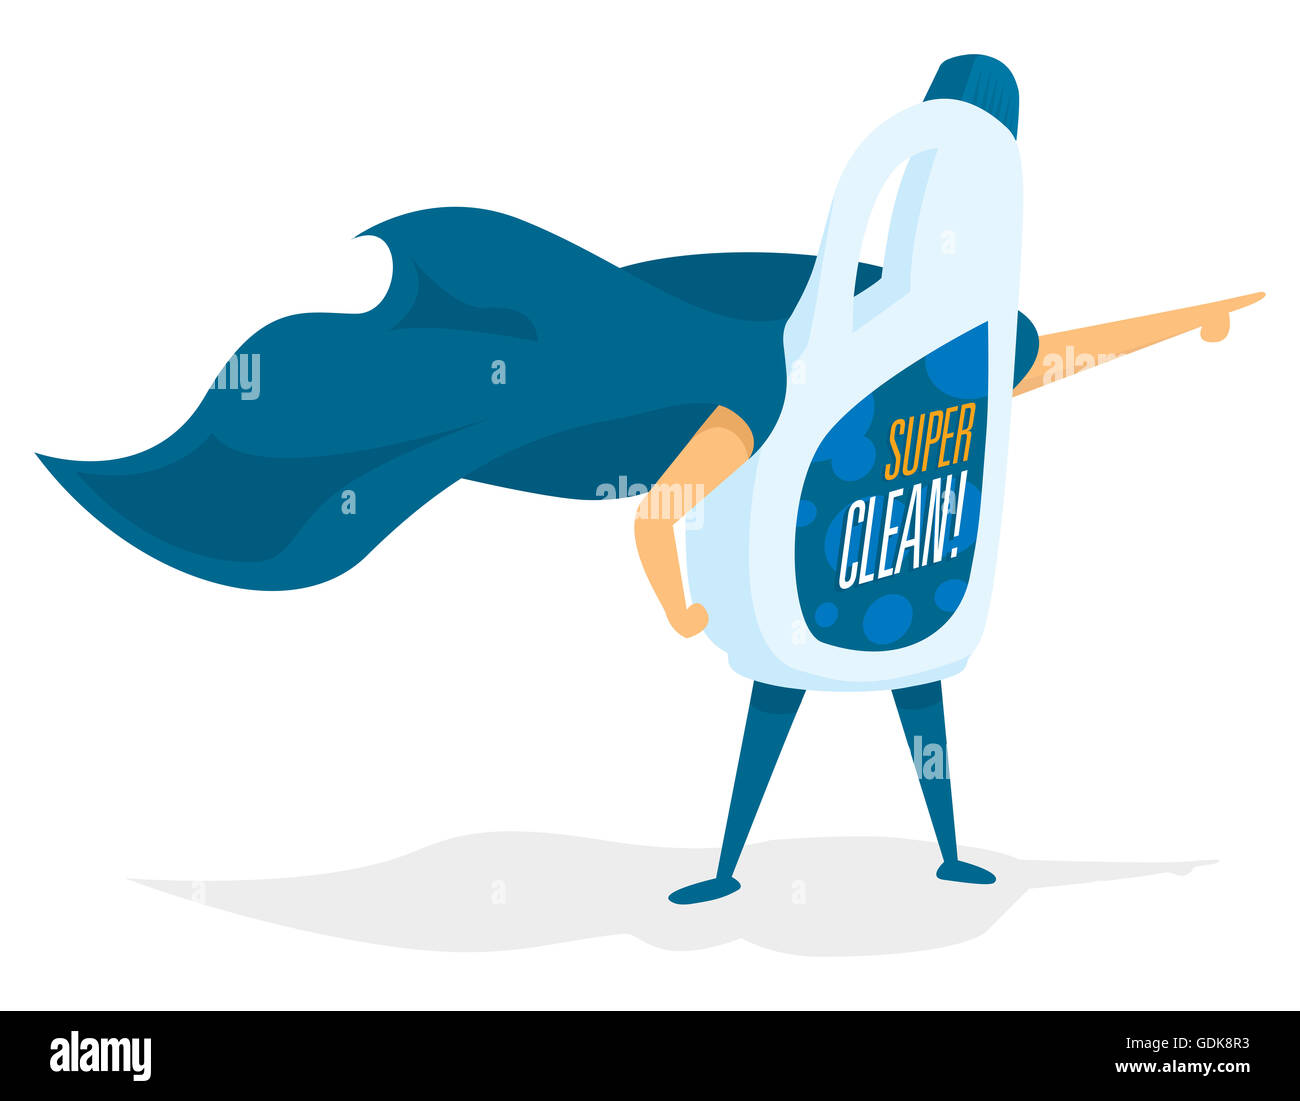 Cartoon illustration of super cleaning product as hero saving the day Stock Photo